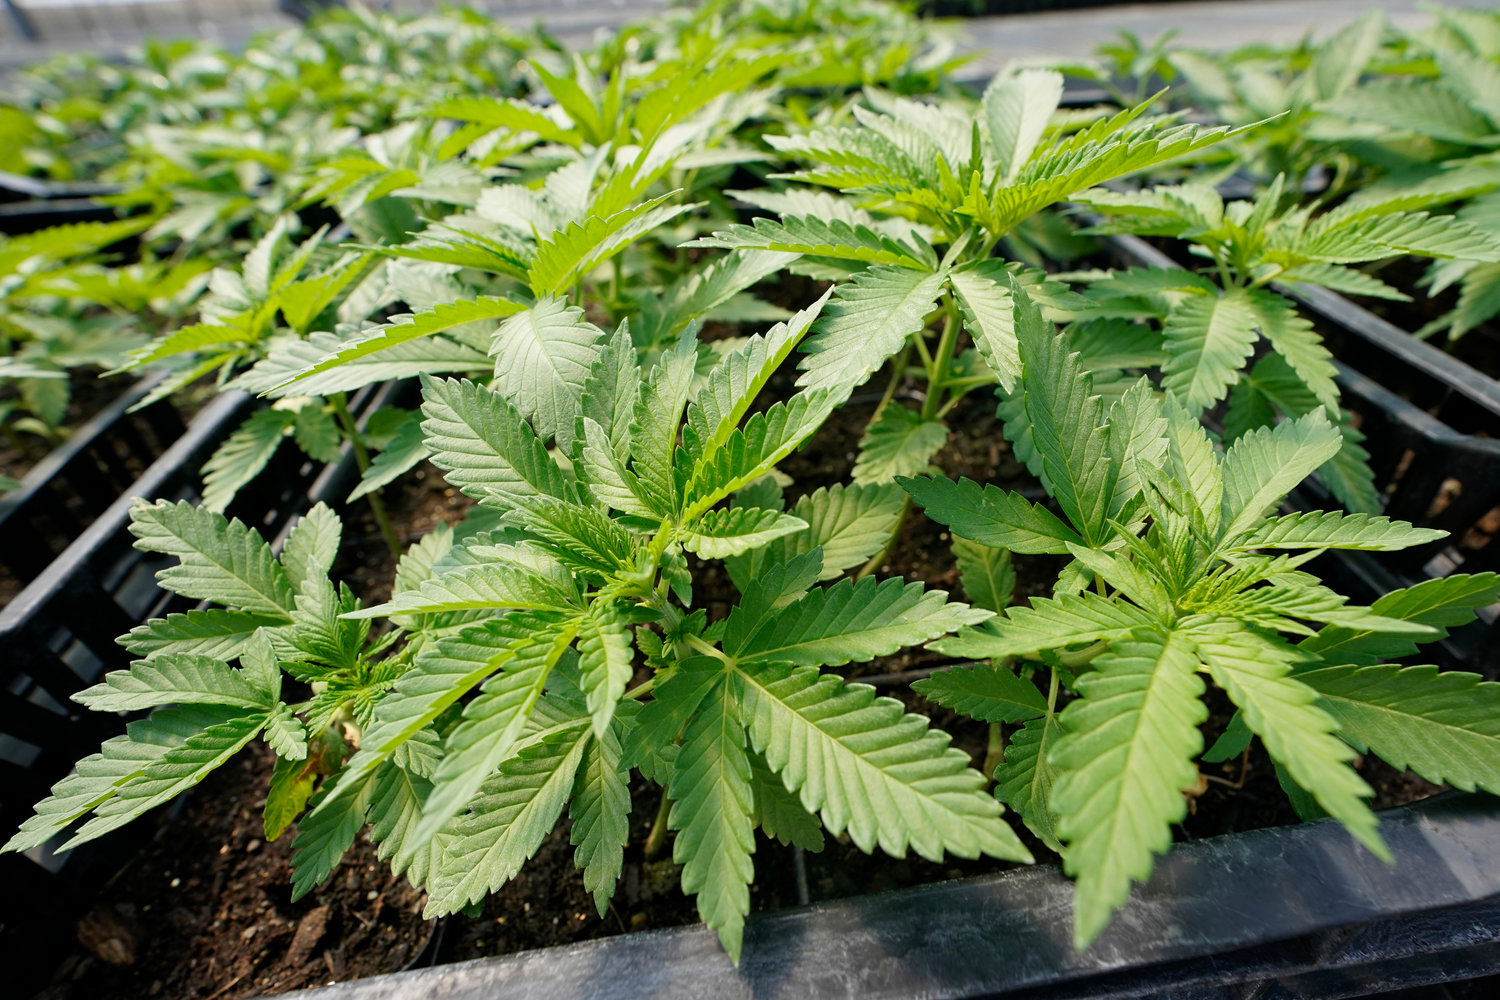 Marijuana plants for the adult recreational market are seen in a greenhouse at Hepworth Farms in Milton, N.Y., in this July 2022 file photo. New York has issued the first 36 cannabis dispensary licenses on Monday, Nov. 21, taking a monumental step in establishing a legal “and lucrative,” marketplace for recreational marijuana.